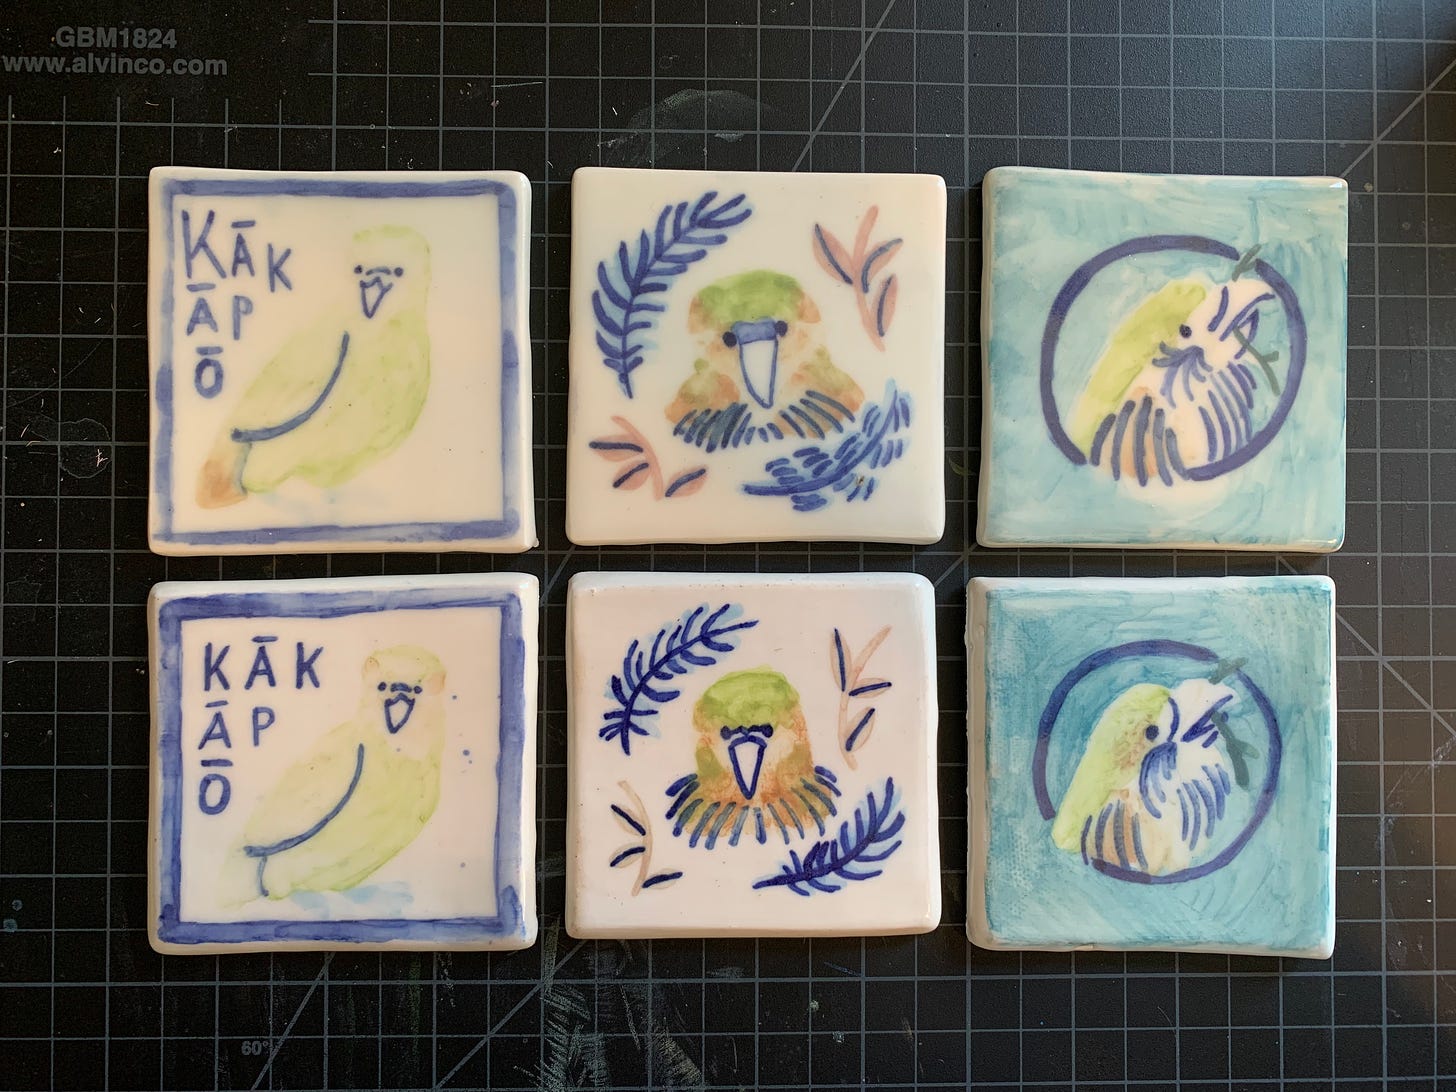 porcelain and stoneware test tiles with kakapo drawings applied with underglaze